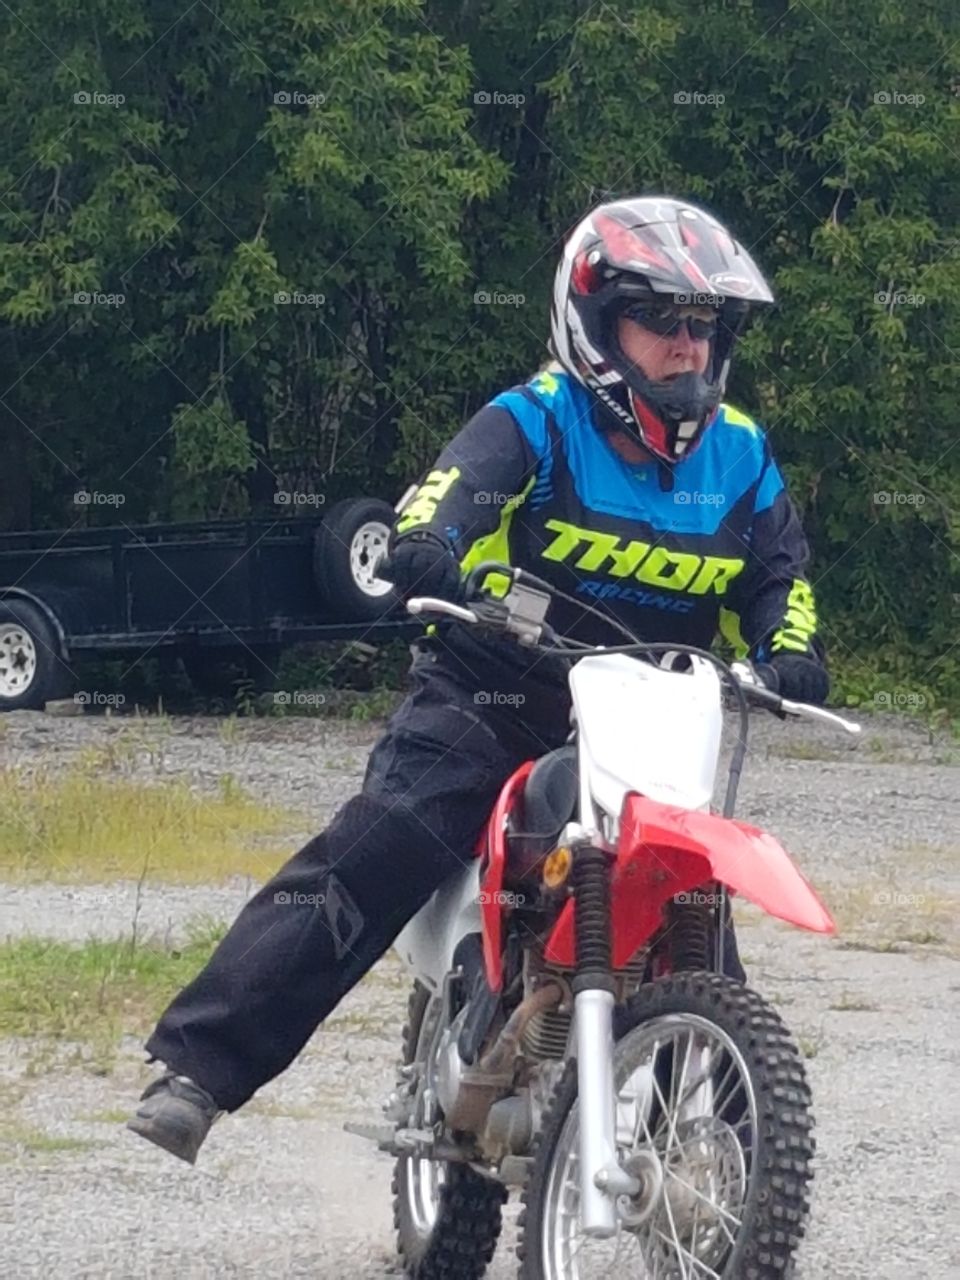 this is Me practicing driving a dirt bike. I have been learning to shift gears. not easy, but man it was fun to finally at 46 yrs old be able to ride a motorcycle